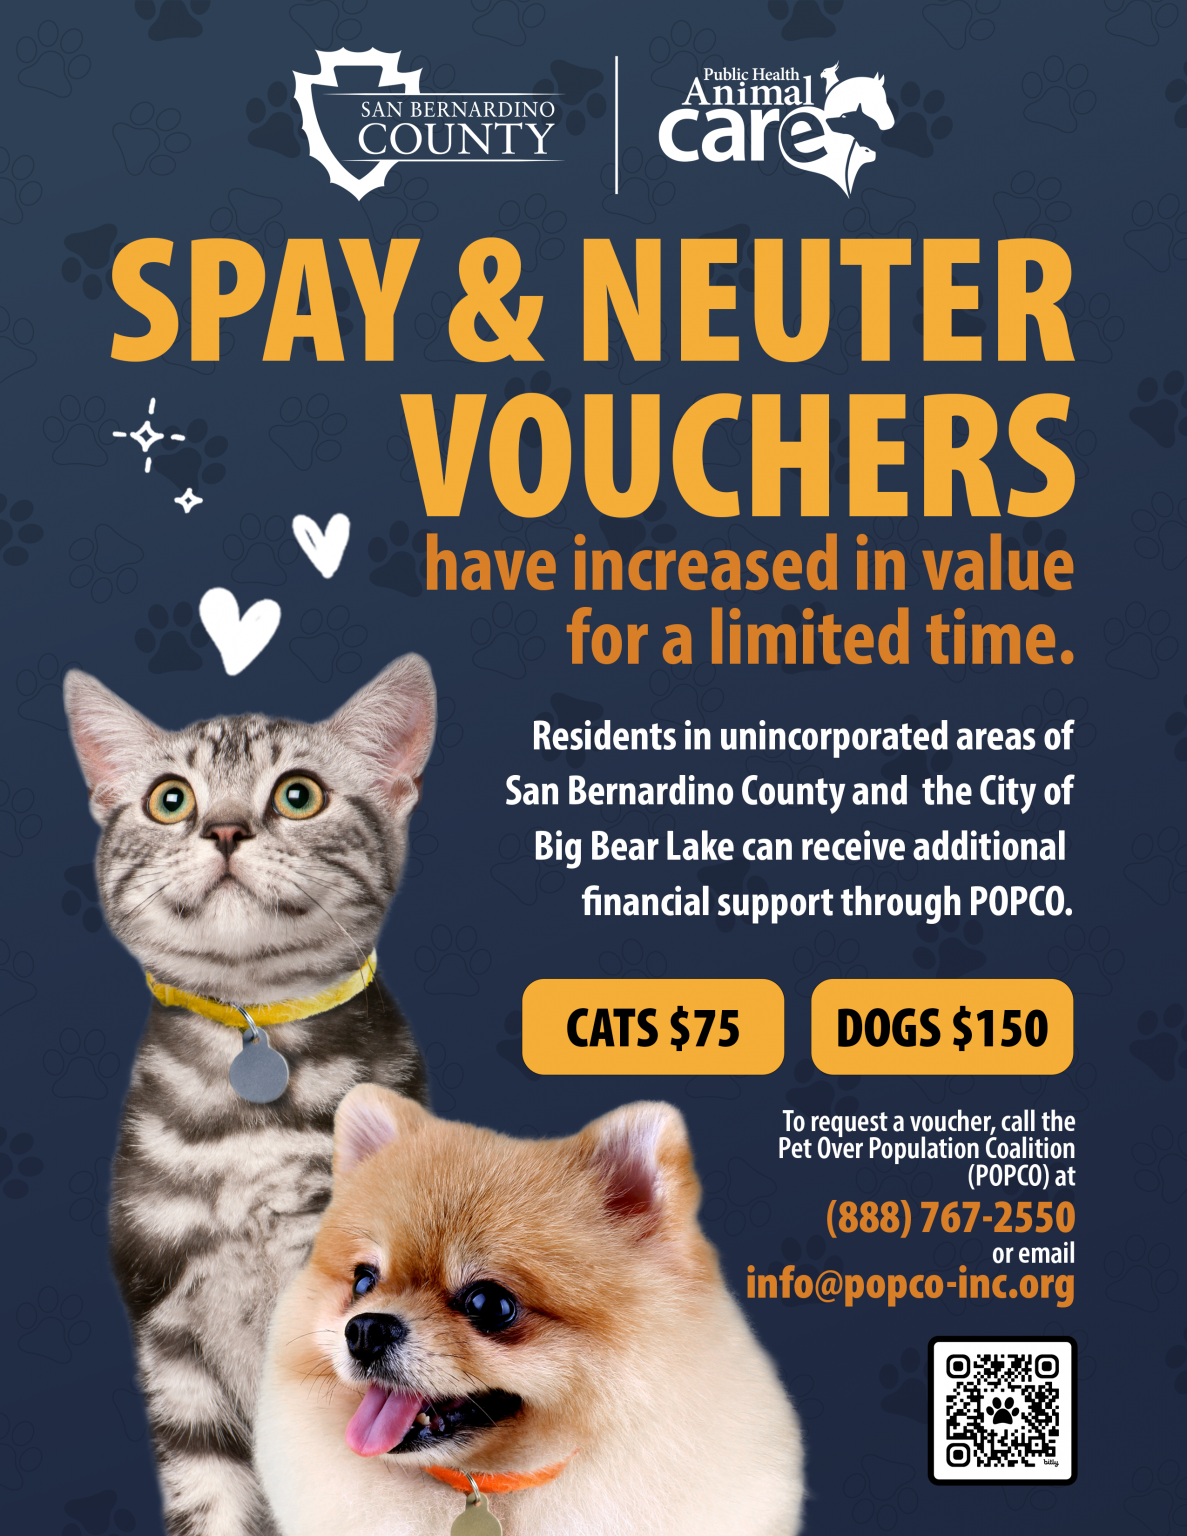 San Bernardino County provides affordable spay and neuter vouchers to